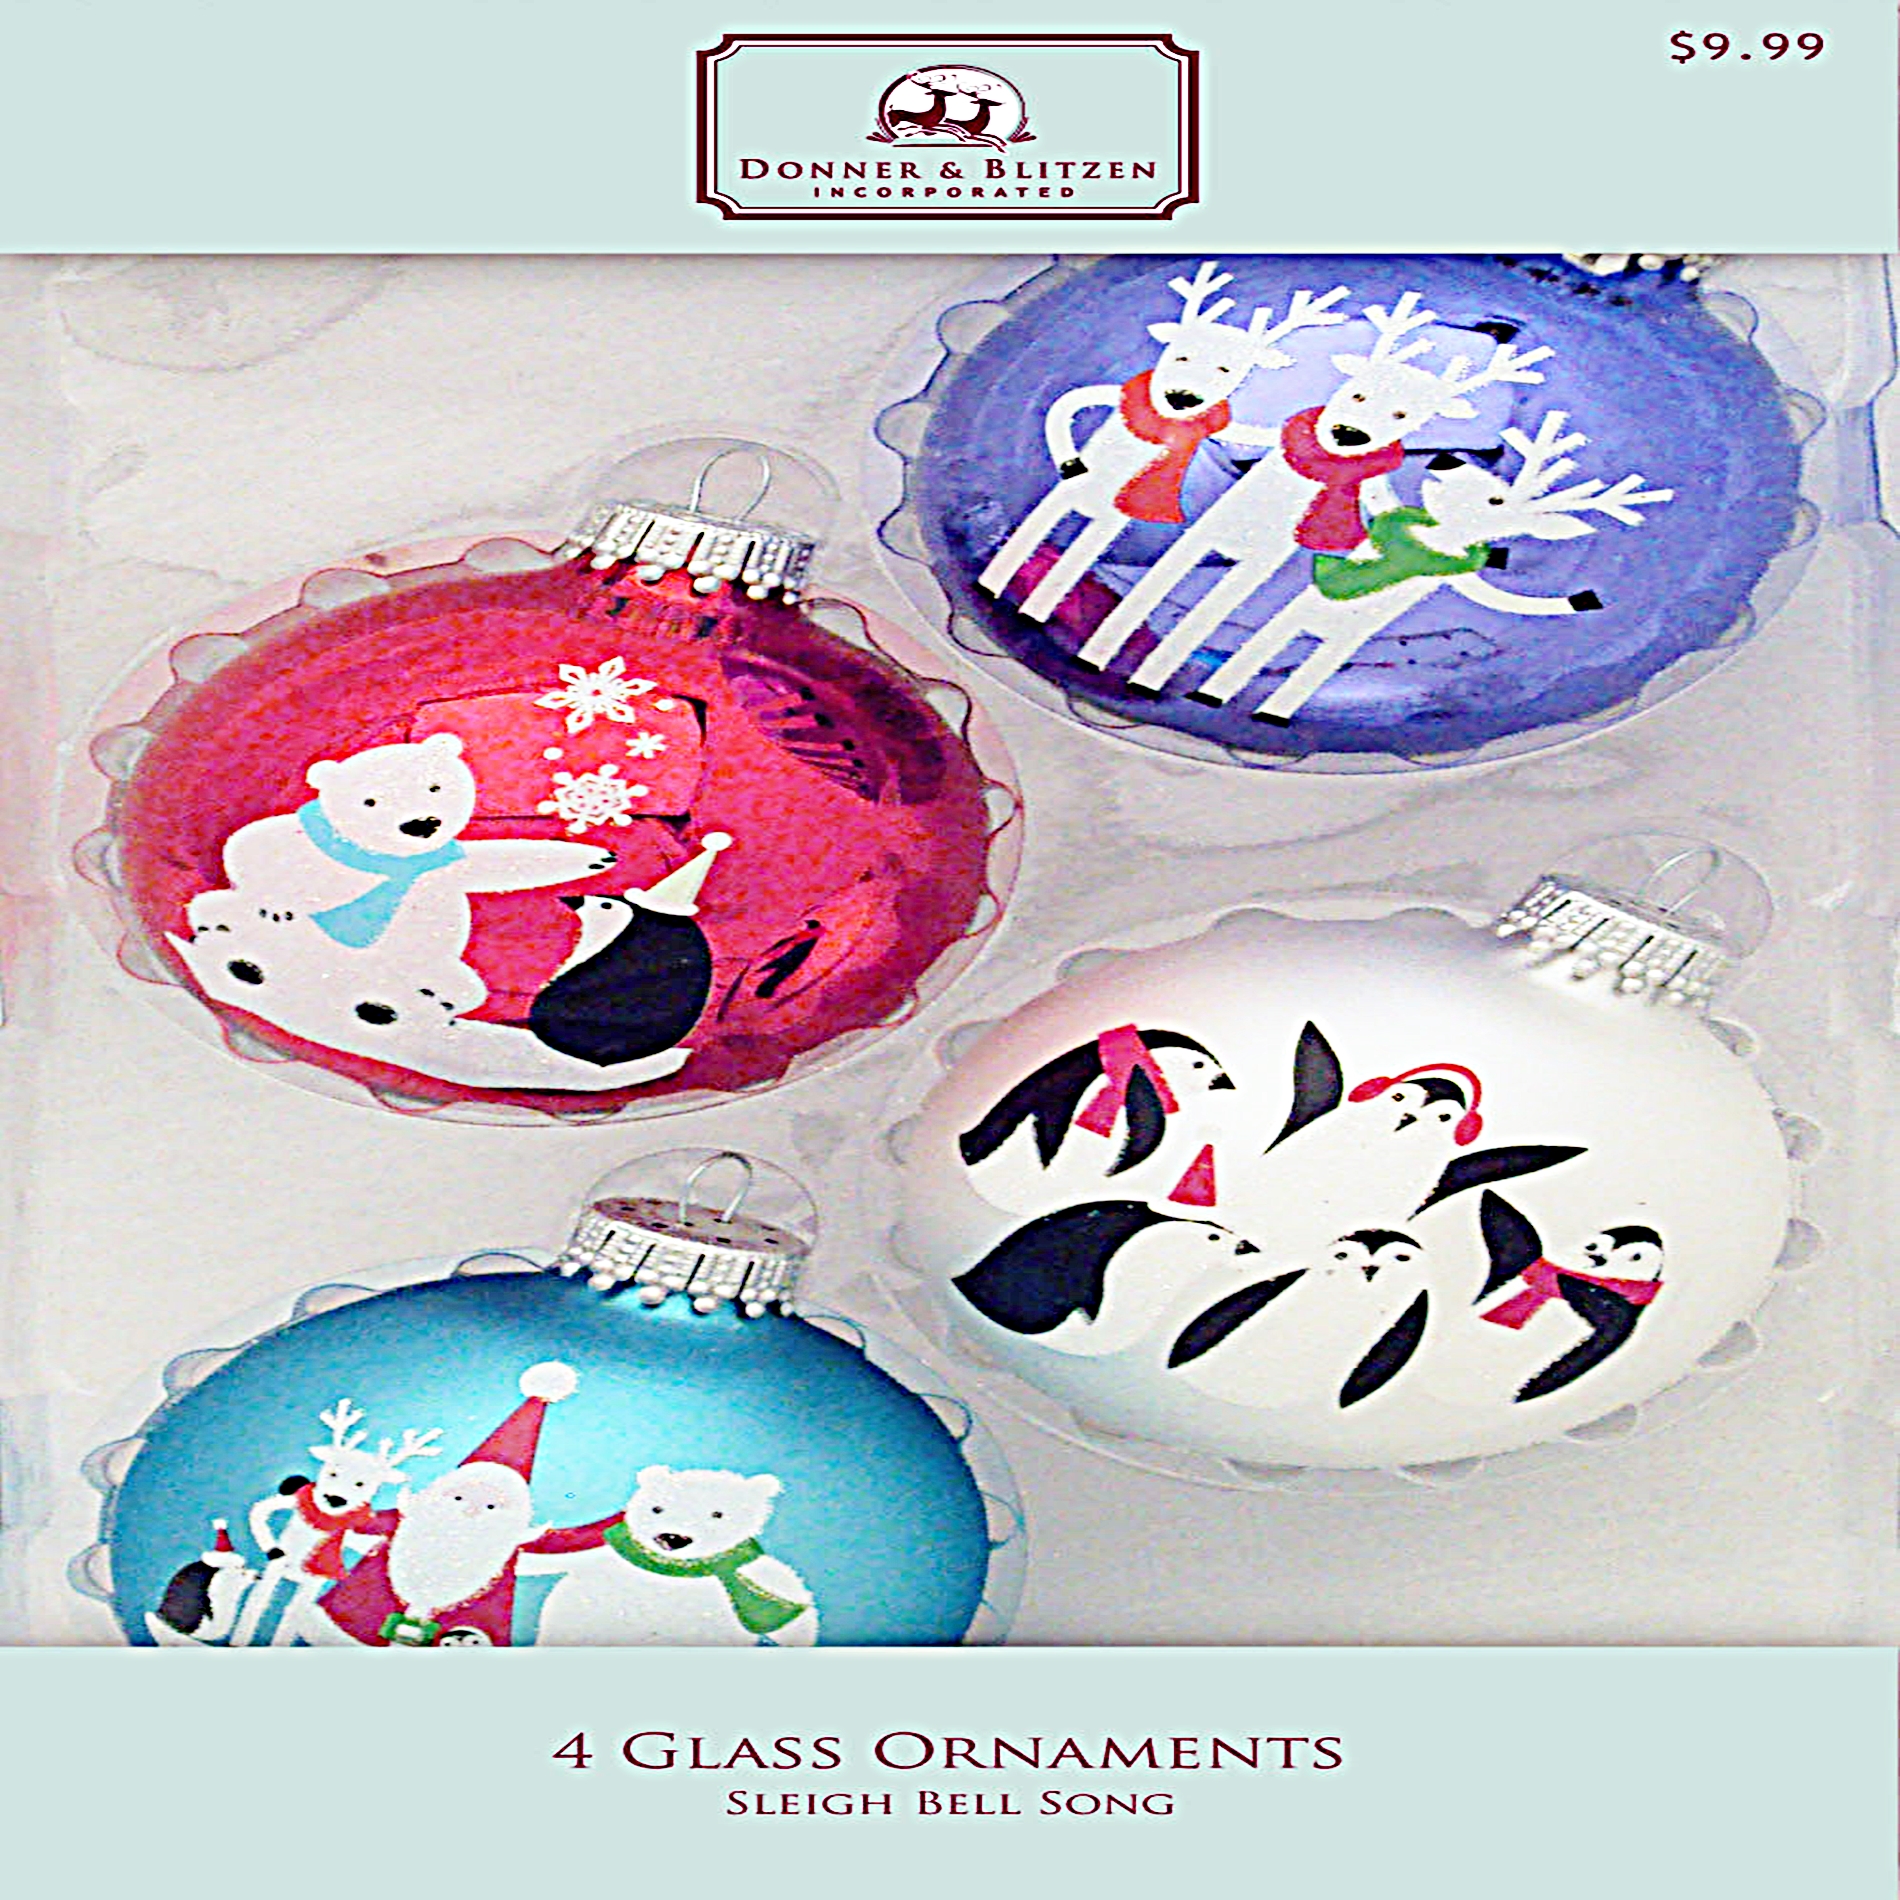 Donner & Blitzen Incorporated 67mm Decorated Character Glass Ornaments -4 Pack